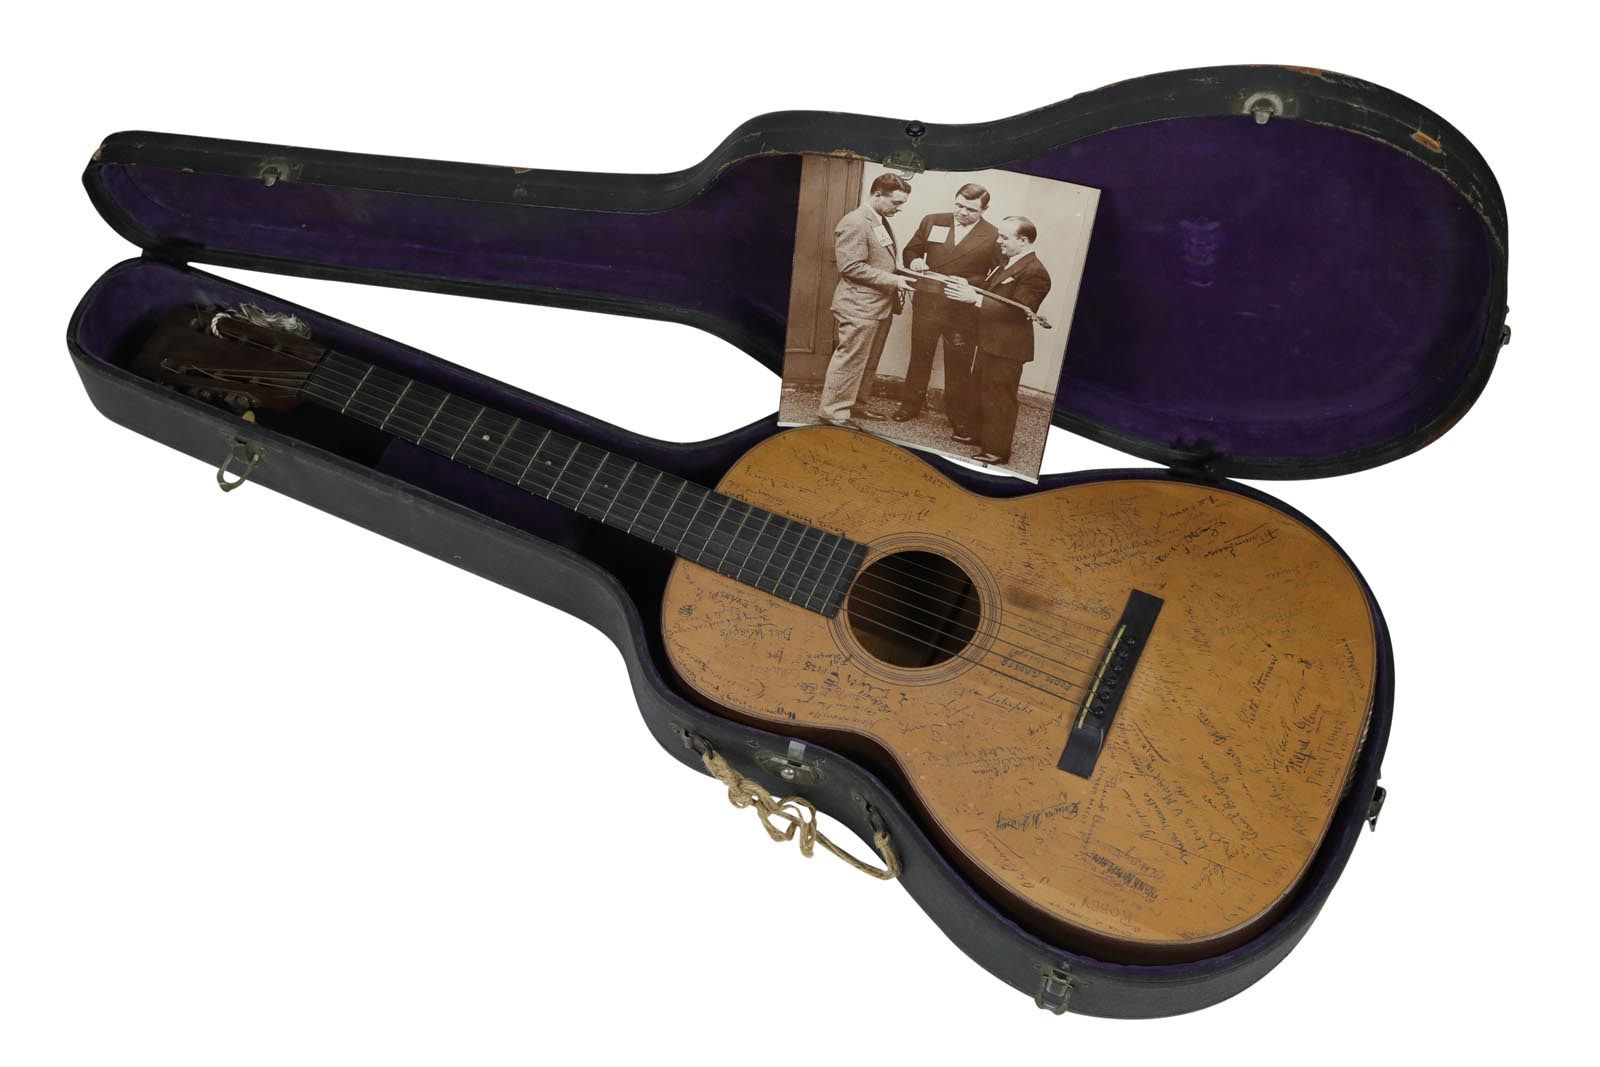 Ruth and Gehrig - 1928 Babe Ruth & Lou Gehrig "Al Smith Presidential Campaign" Signed Martin Guitar (PSA)